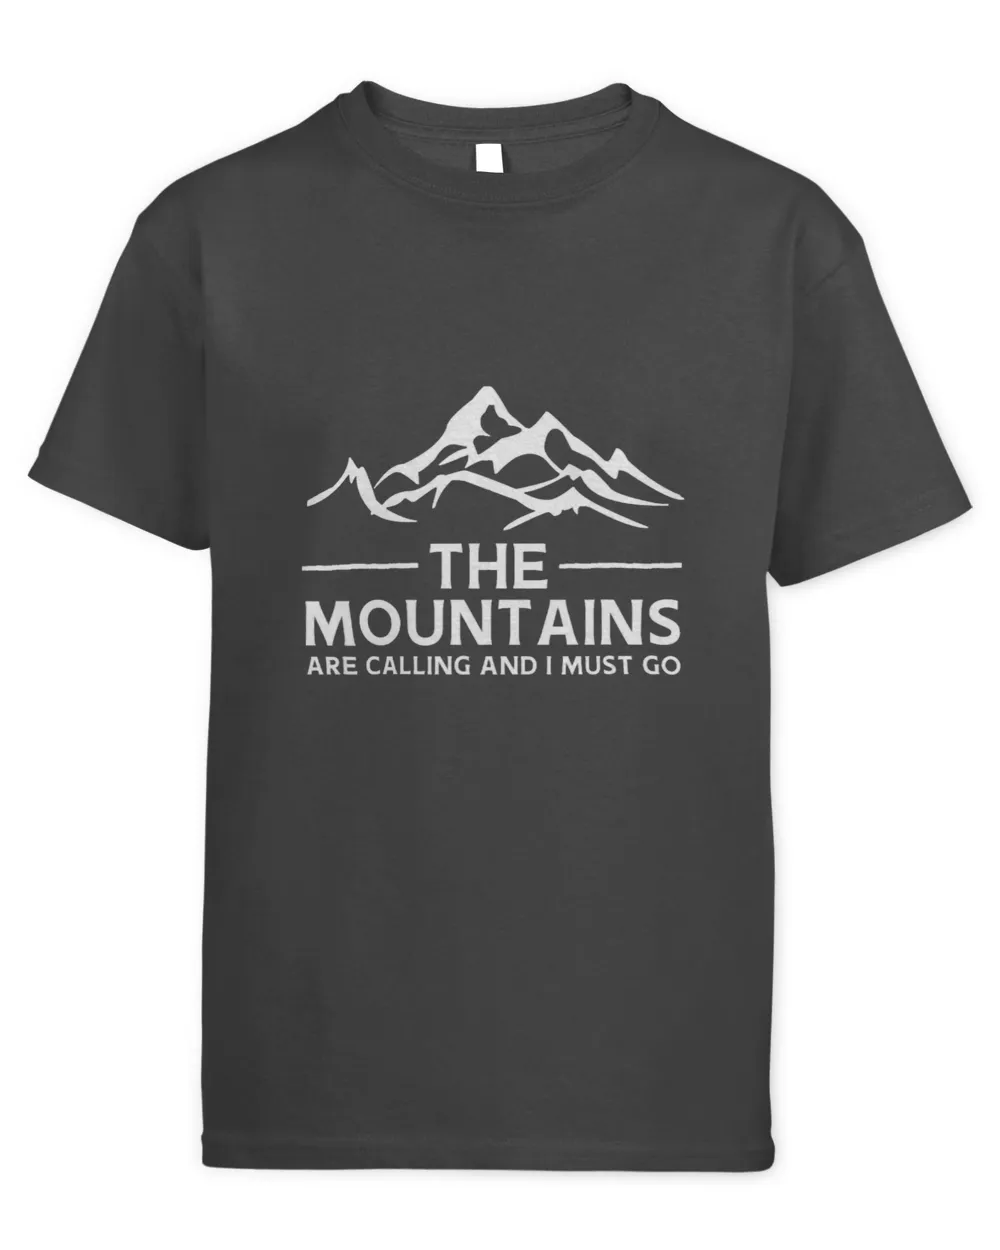 The Mountains Are Calling And I Must Go. Retro Vintage 3